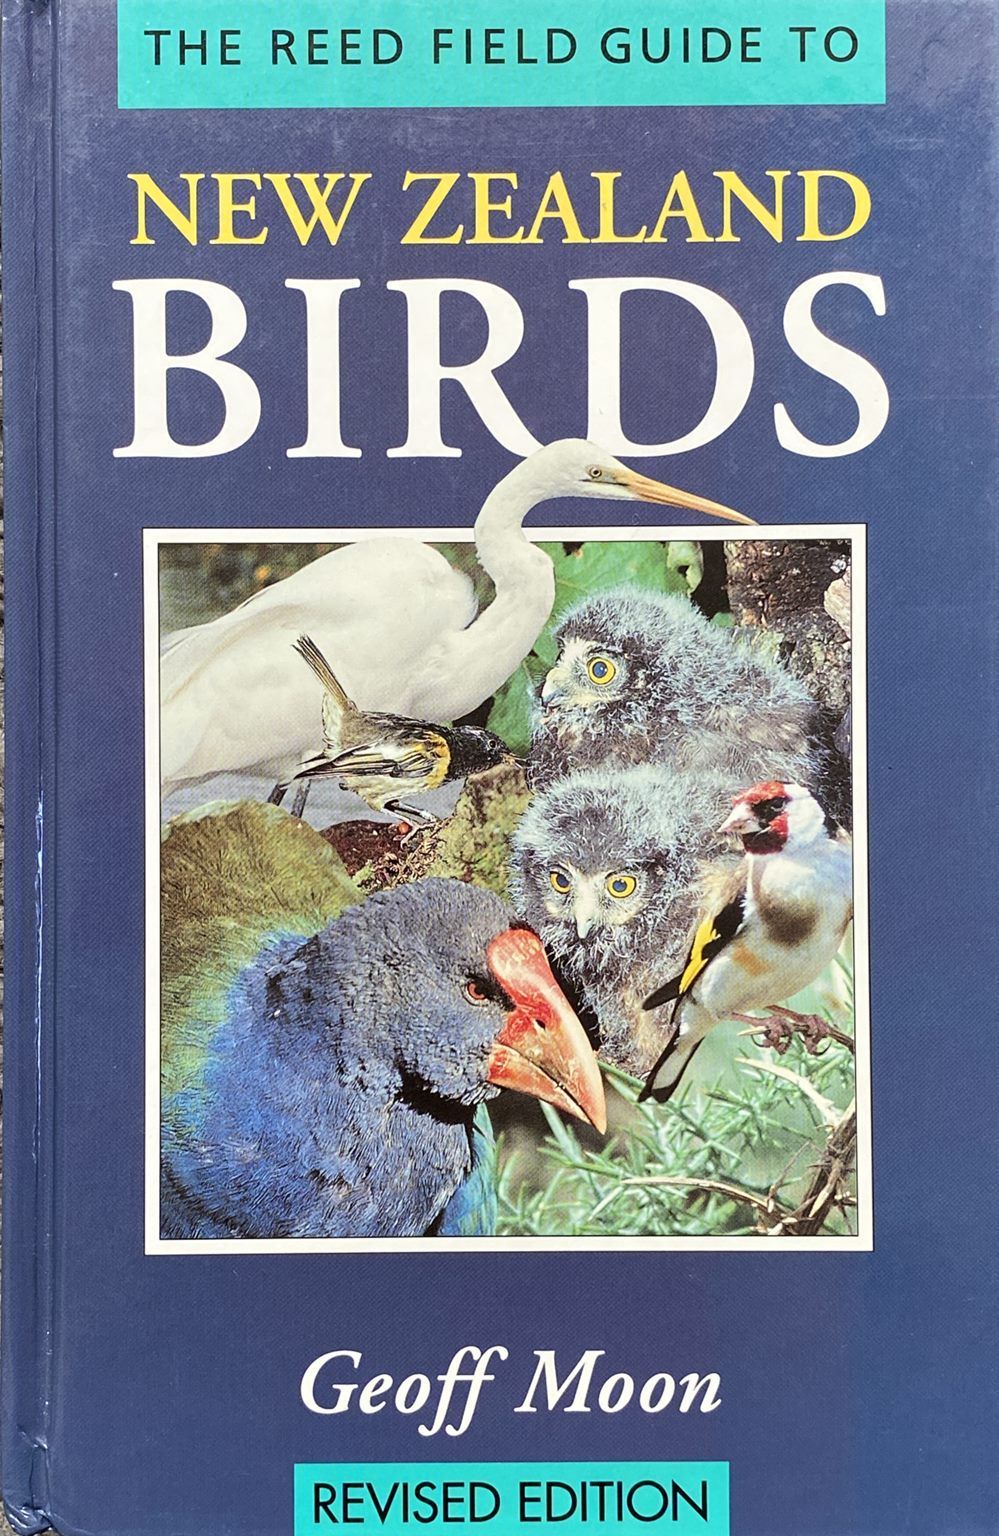 THE REED FIELD GUIDE TO NEW ZEALAND BIRDS